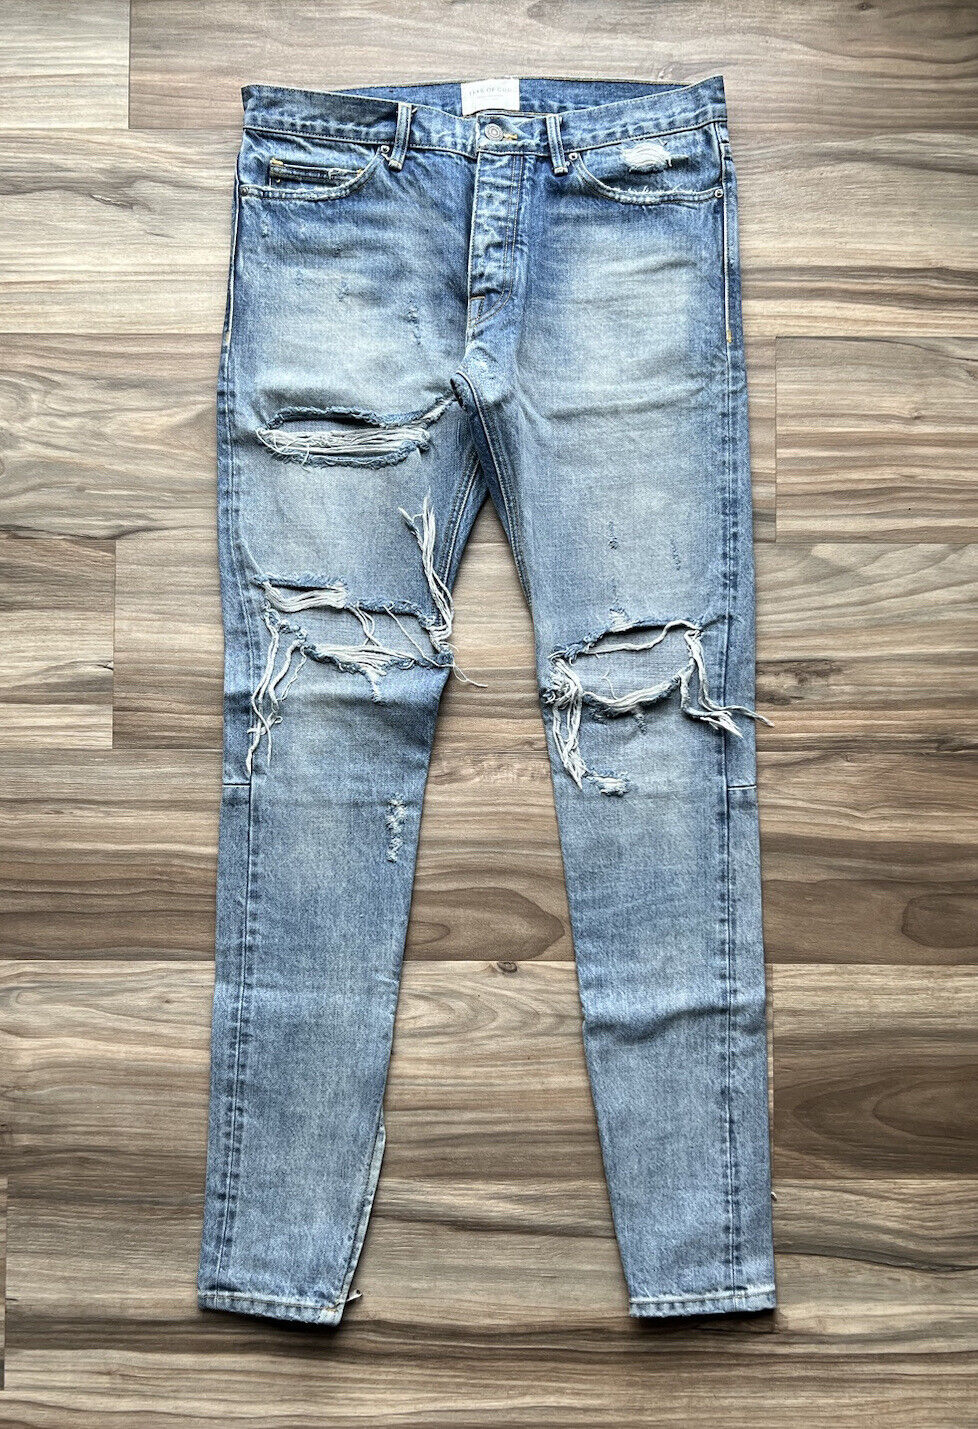 Fear of God Fourth 4th Collection Selvedge Indigo Denim Jeans 